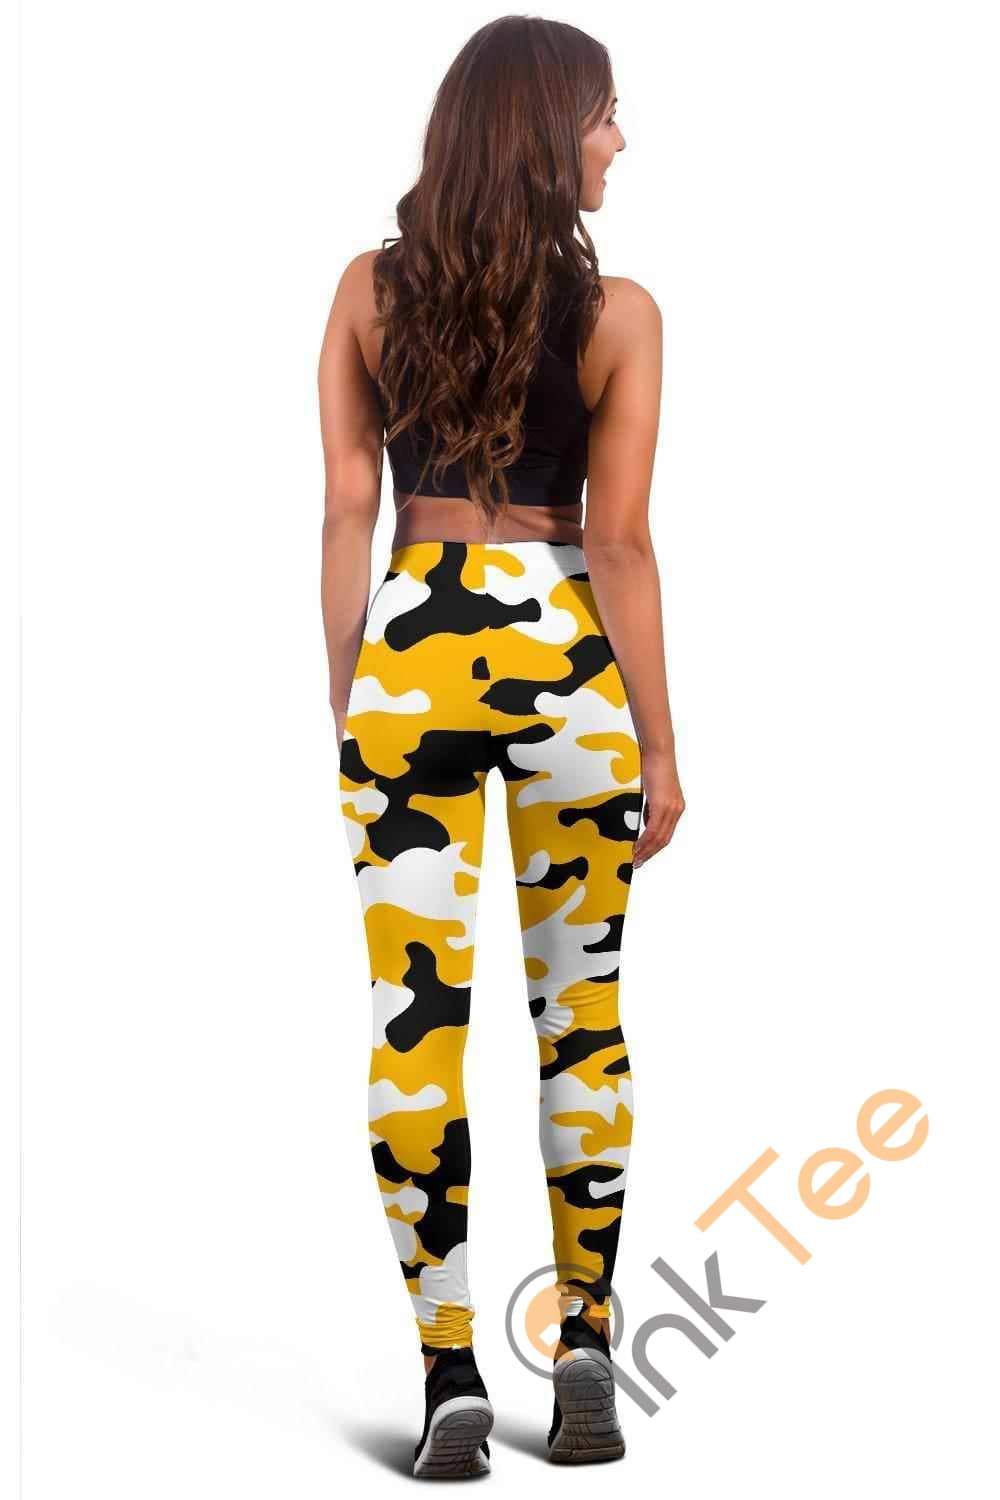 Inktee Store - Pittsburgh Steelers Inspired Tru Camo 3D All Over Print For Yoga Fitness Fashion Women'S Leggings Image